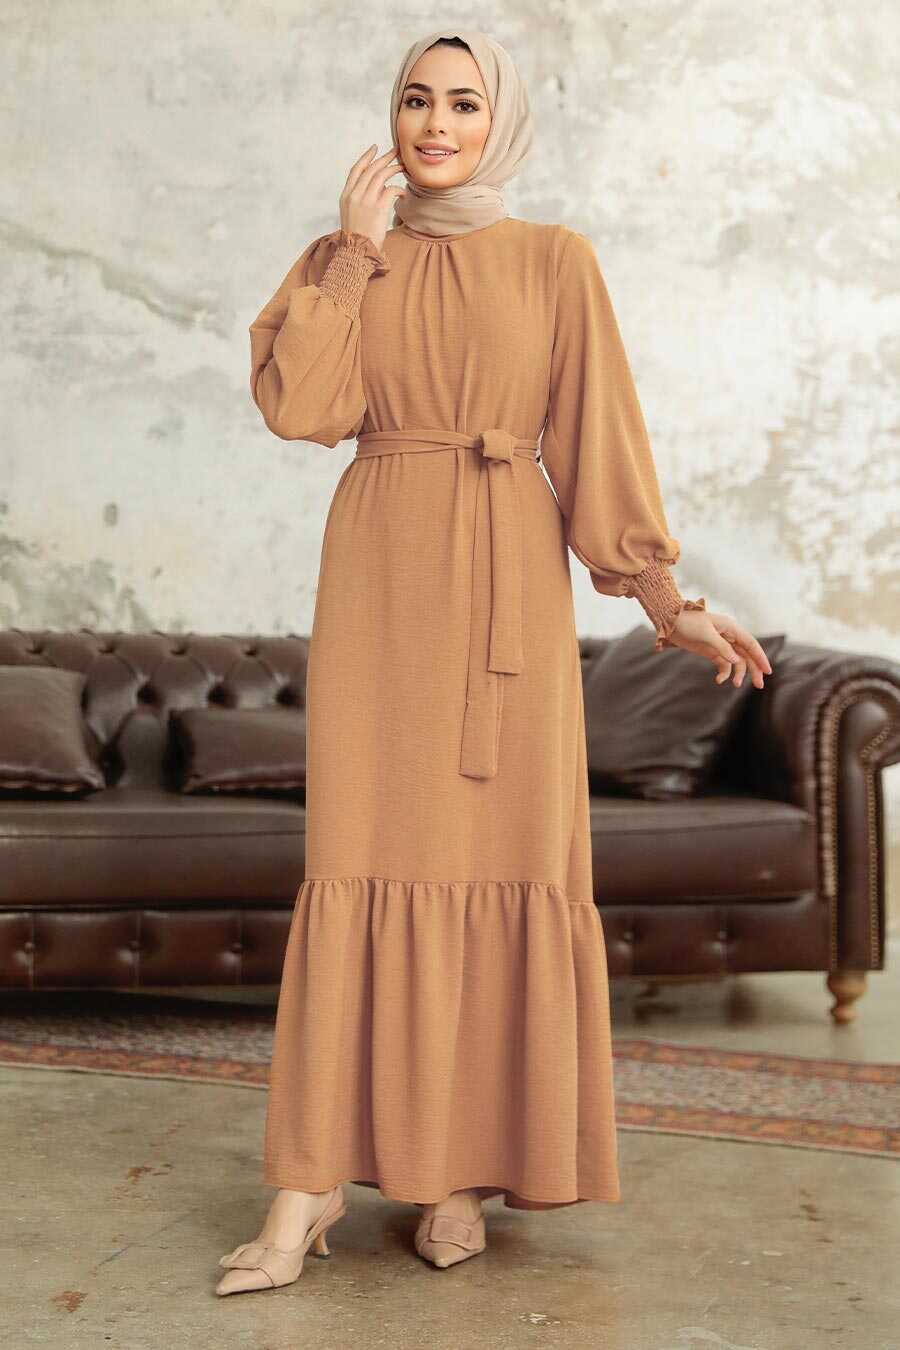 Neva Style - Long Biscuit Hijab Dress 5972BS